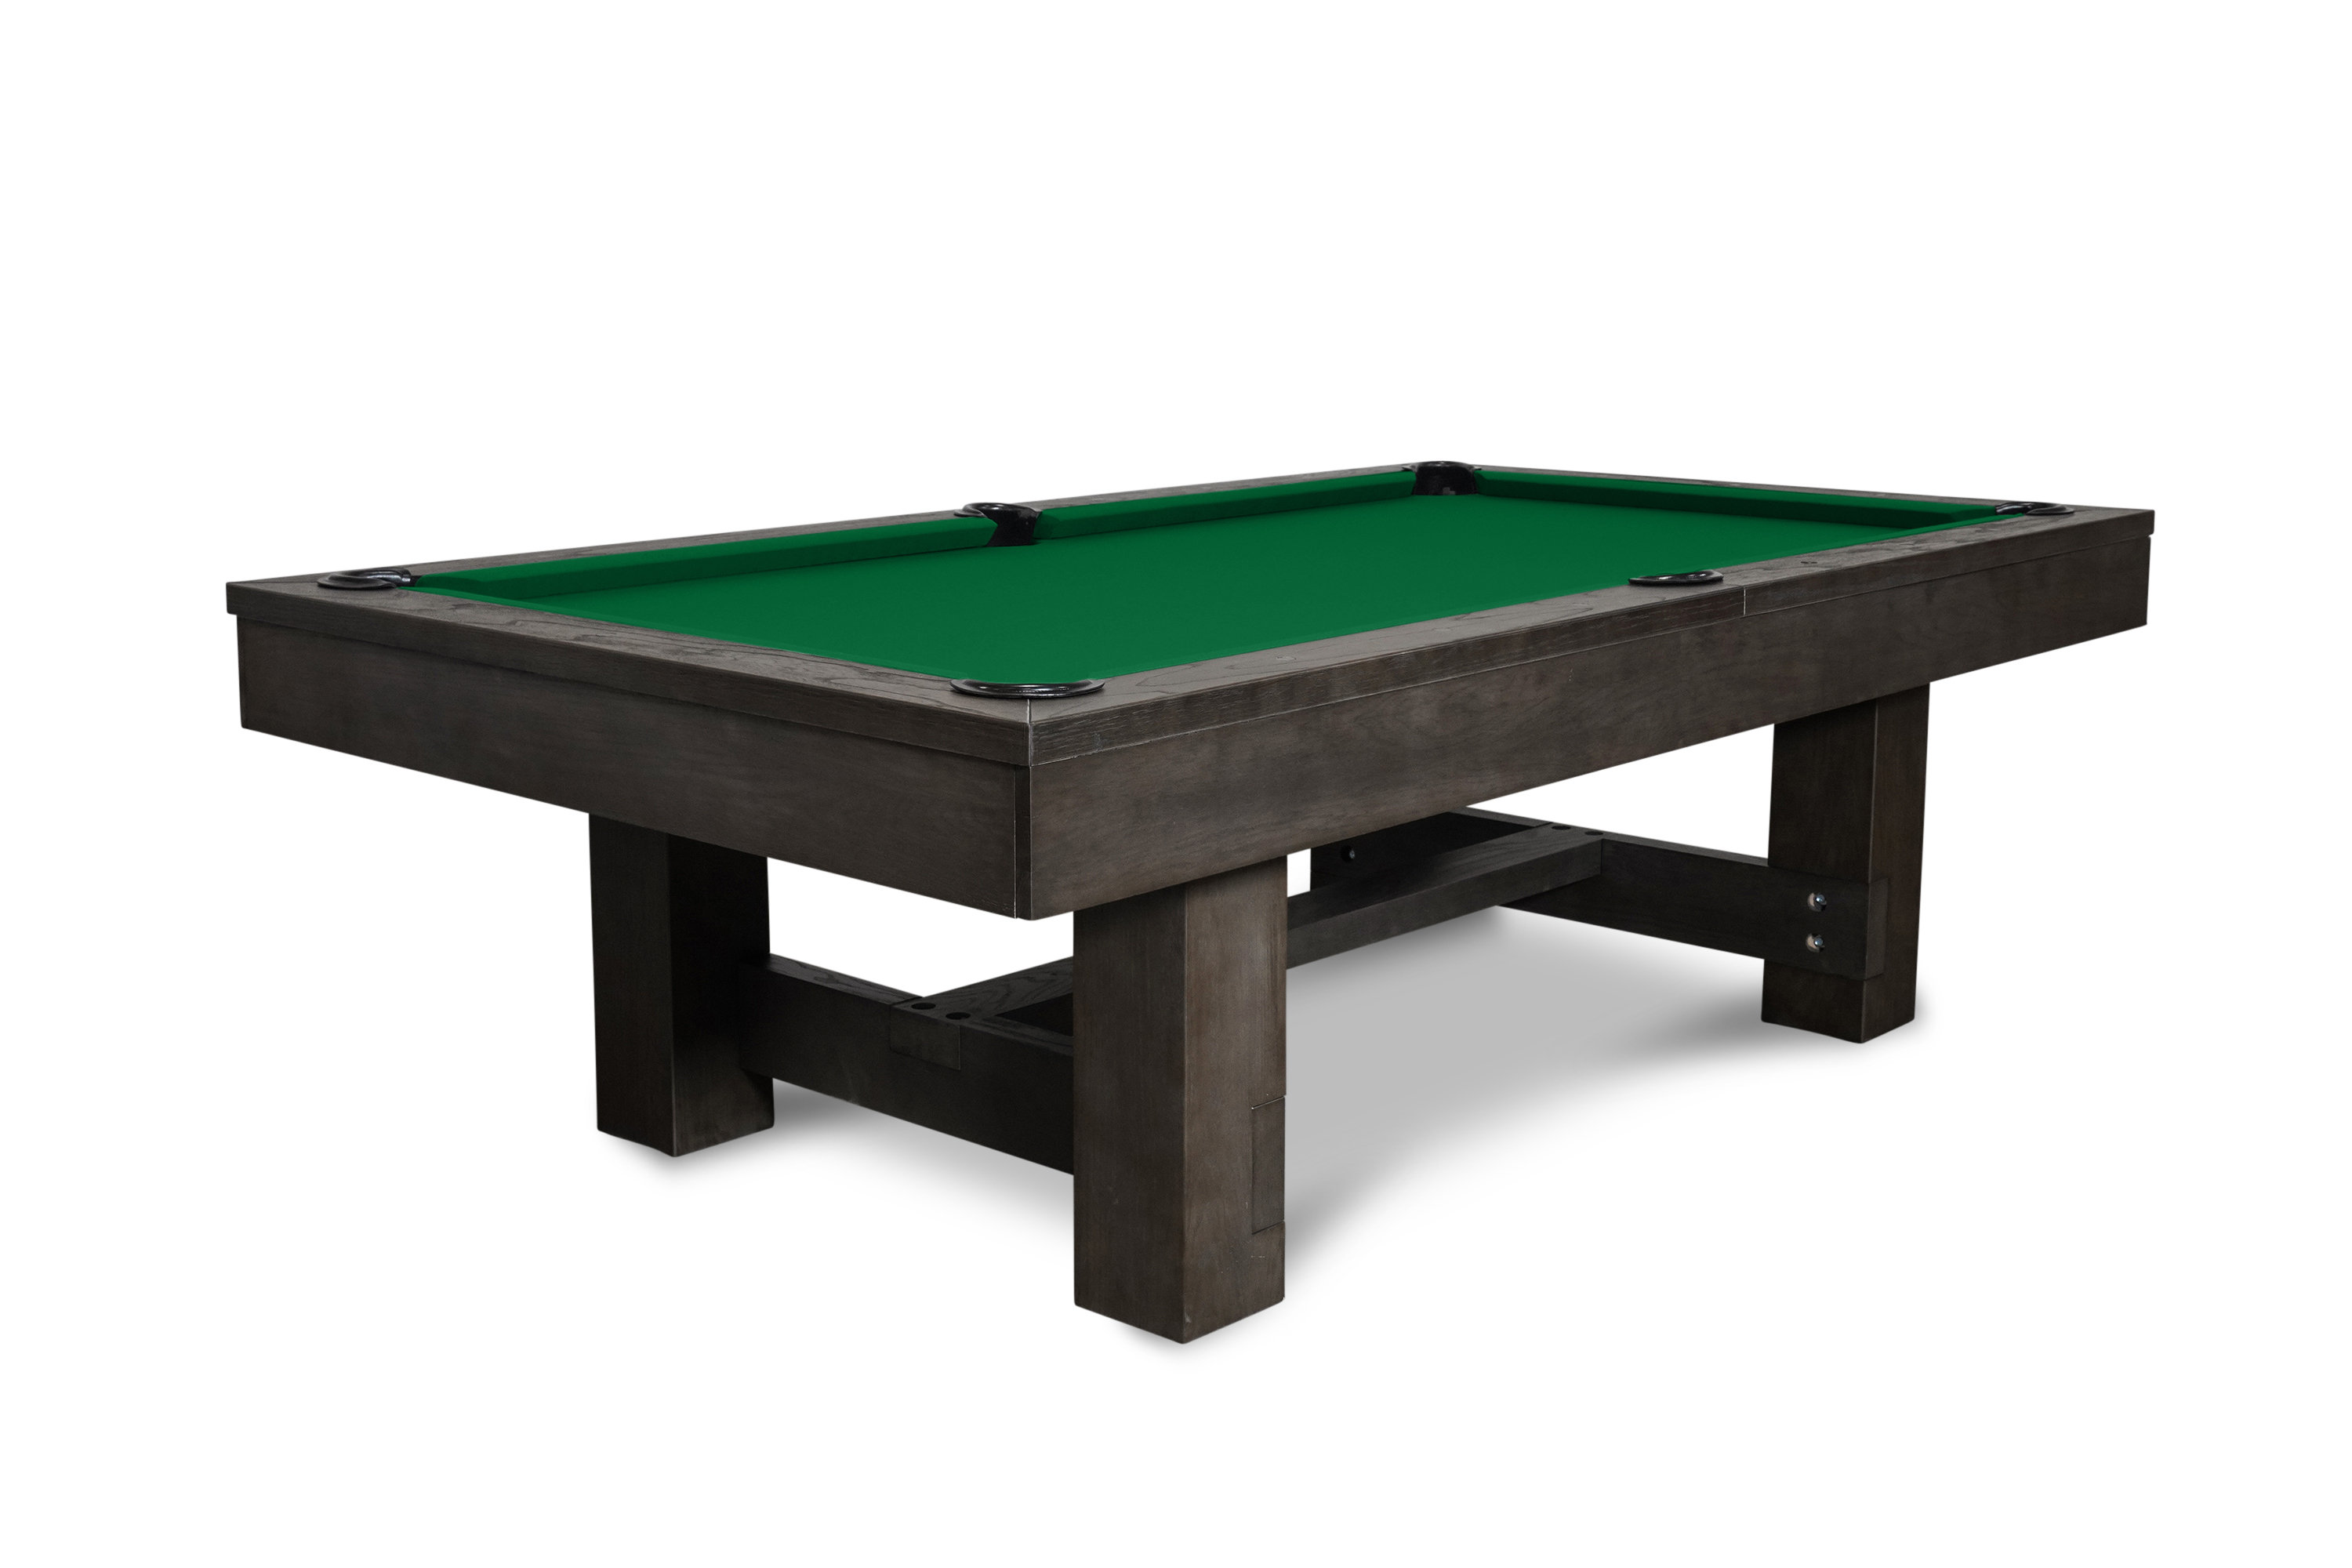 Solid wood slate billiard 8 ball pool table with cheap price for sale